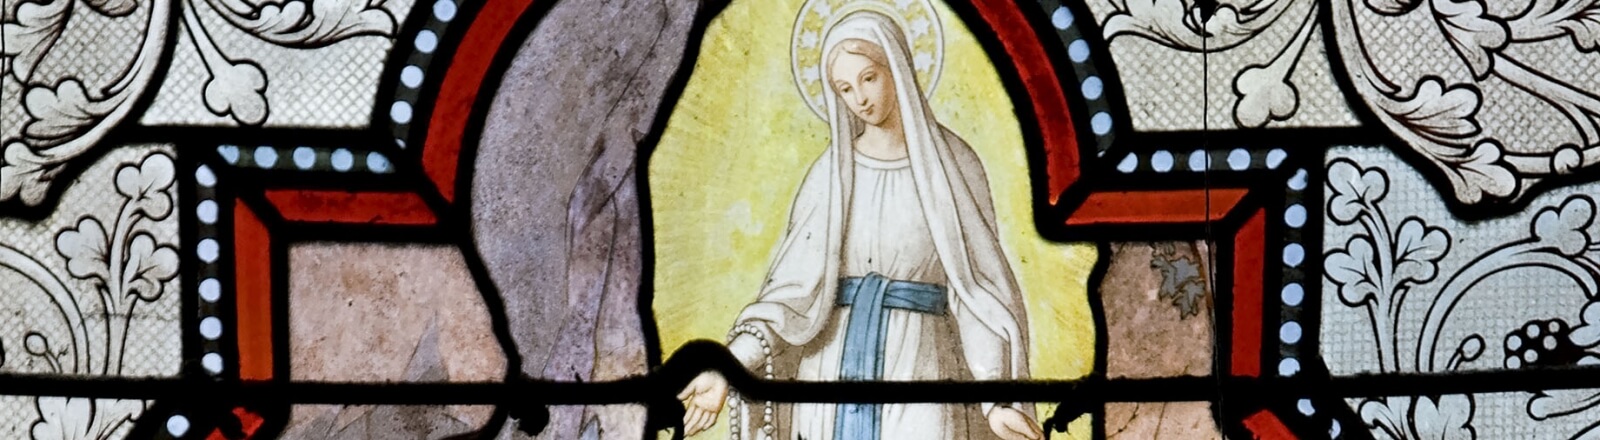 The Message Of Lourdes - 